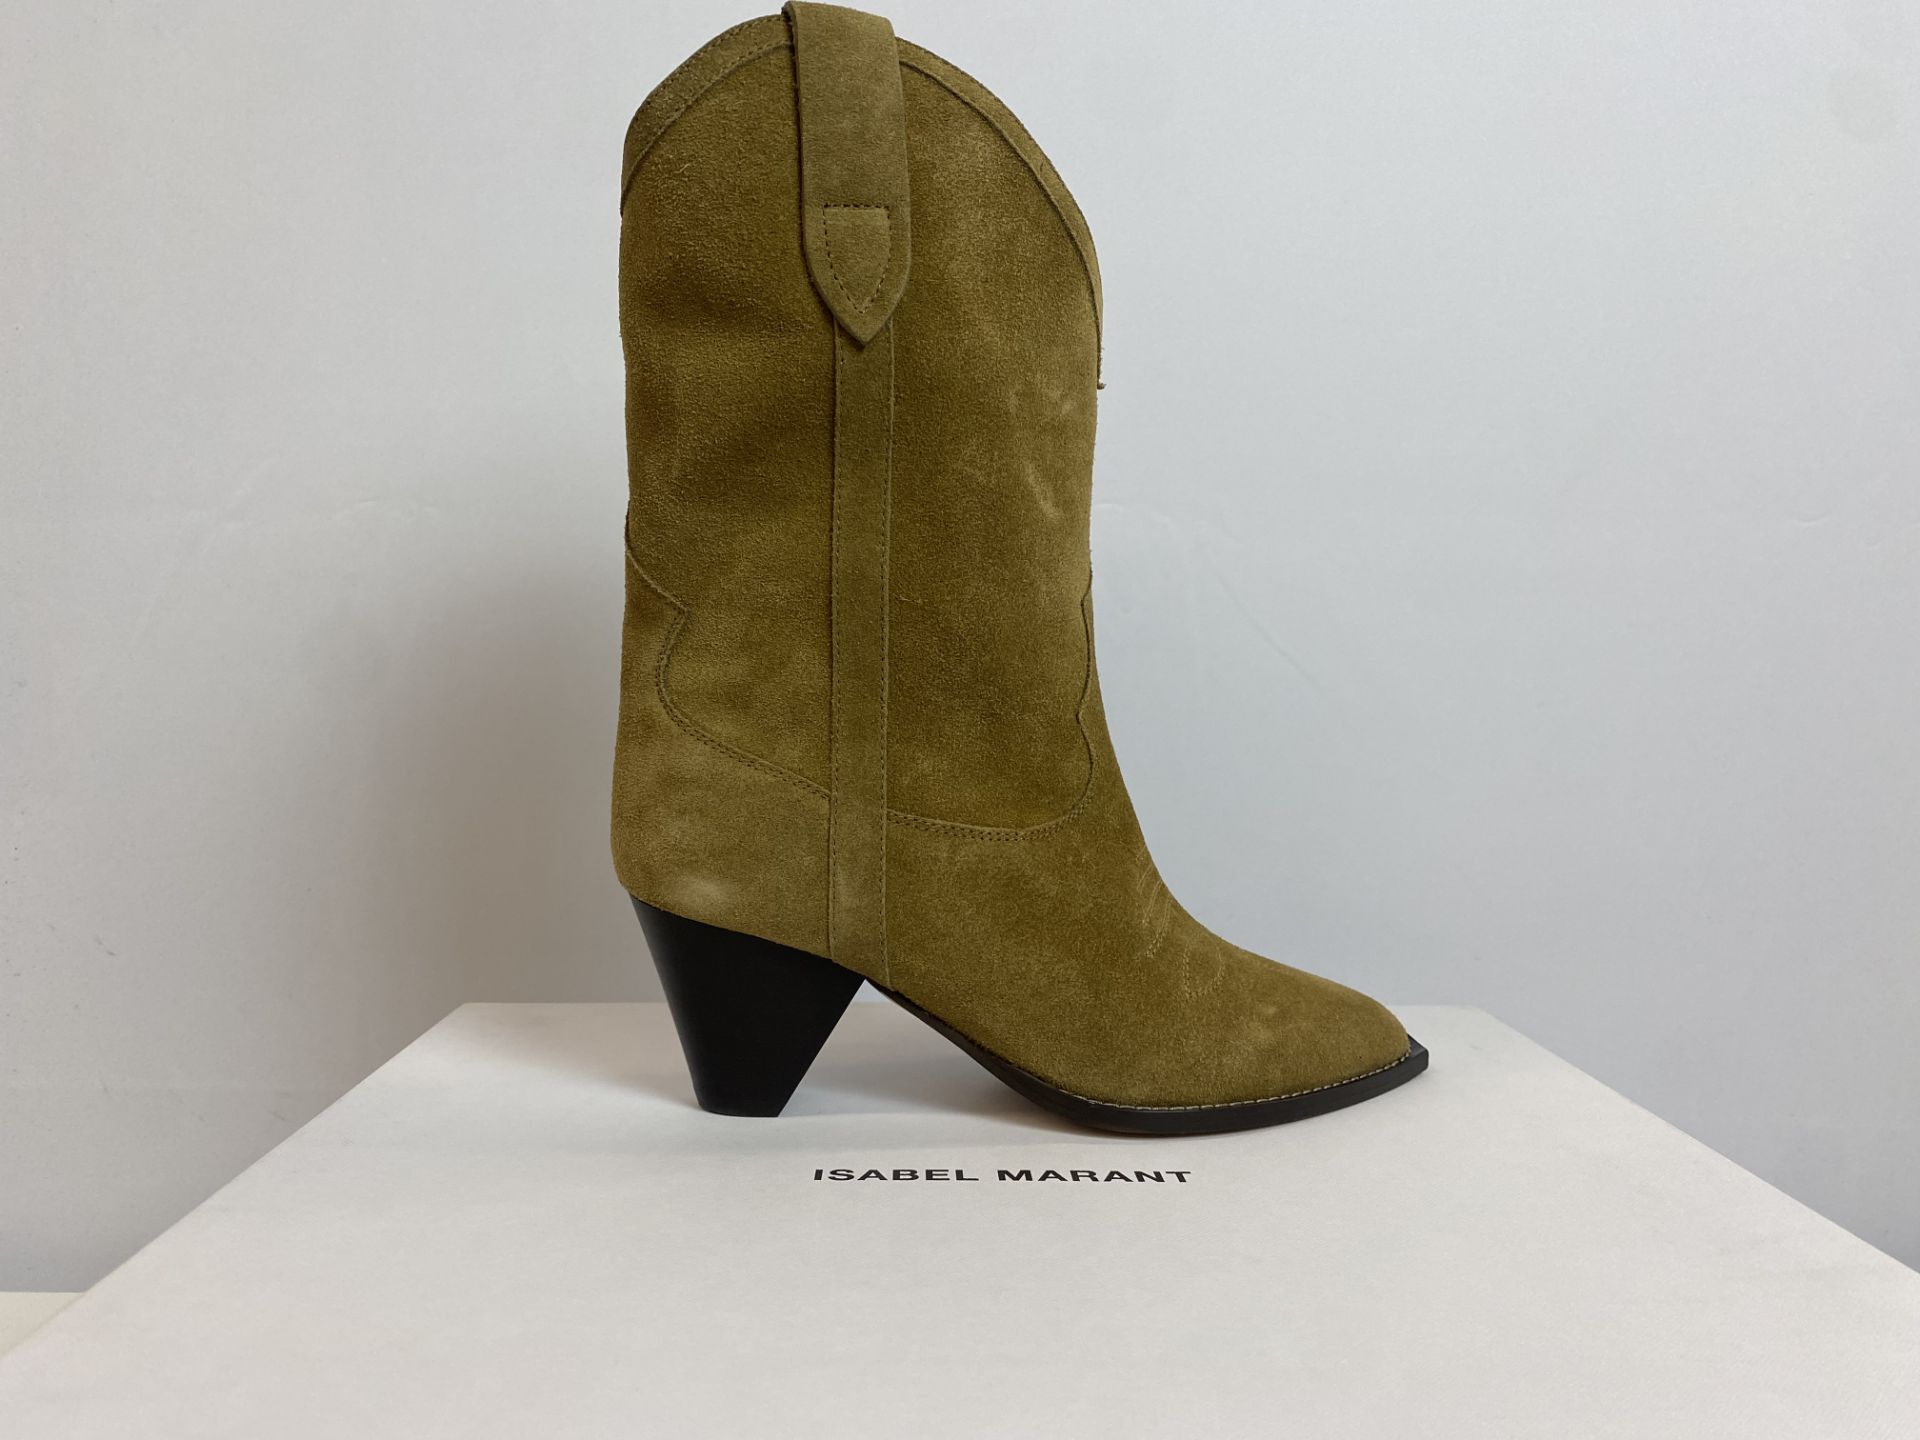 Isabel Marant Boot Luliette Suede Boot Feminine Size: 37 Taupe, Retail Price: $1250